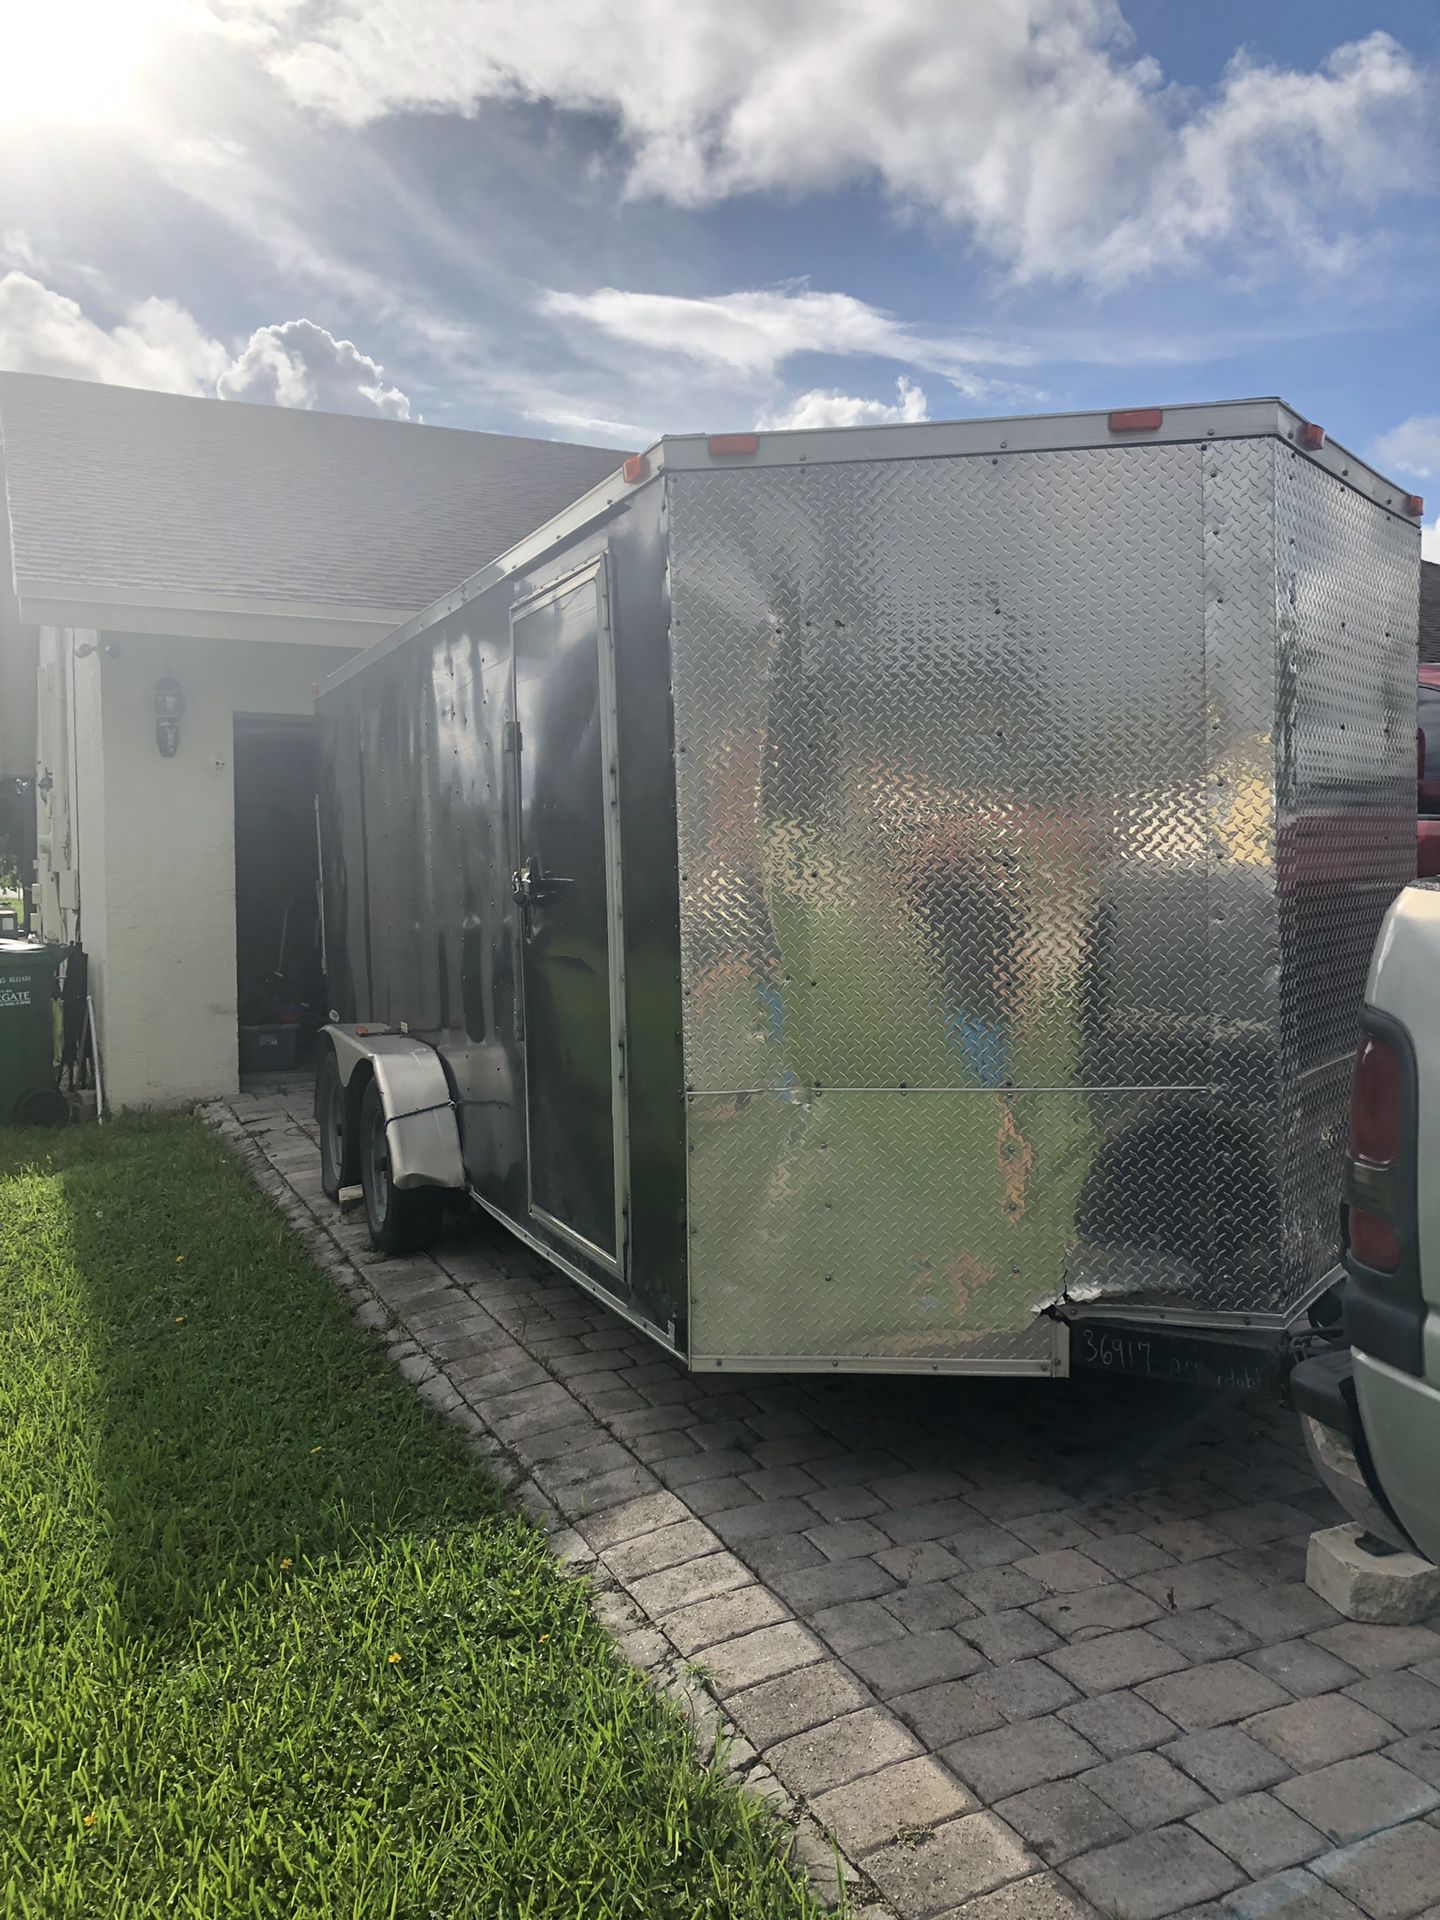 16ft enclosed trailer with tons of truck and car parts